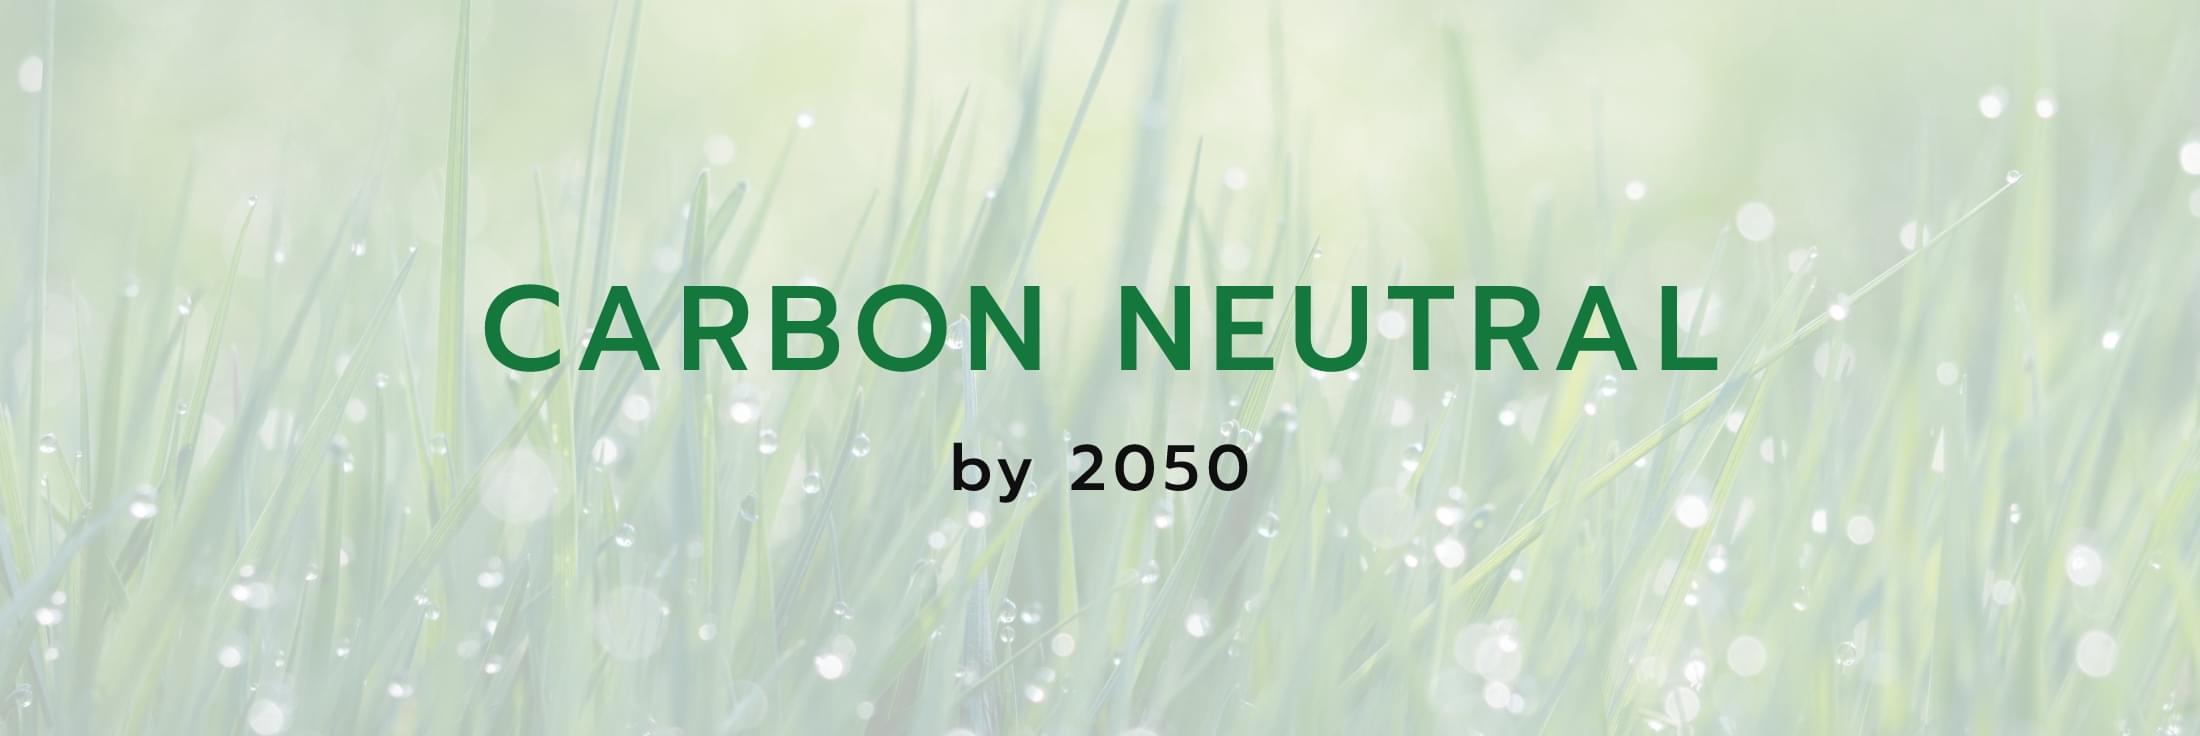 Carbon neutral by 2050